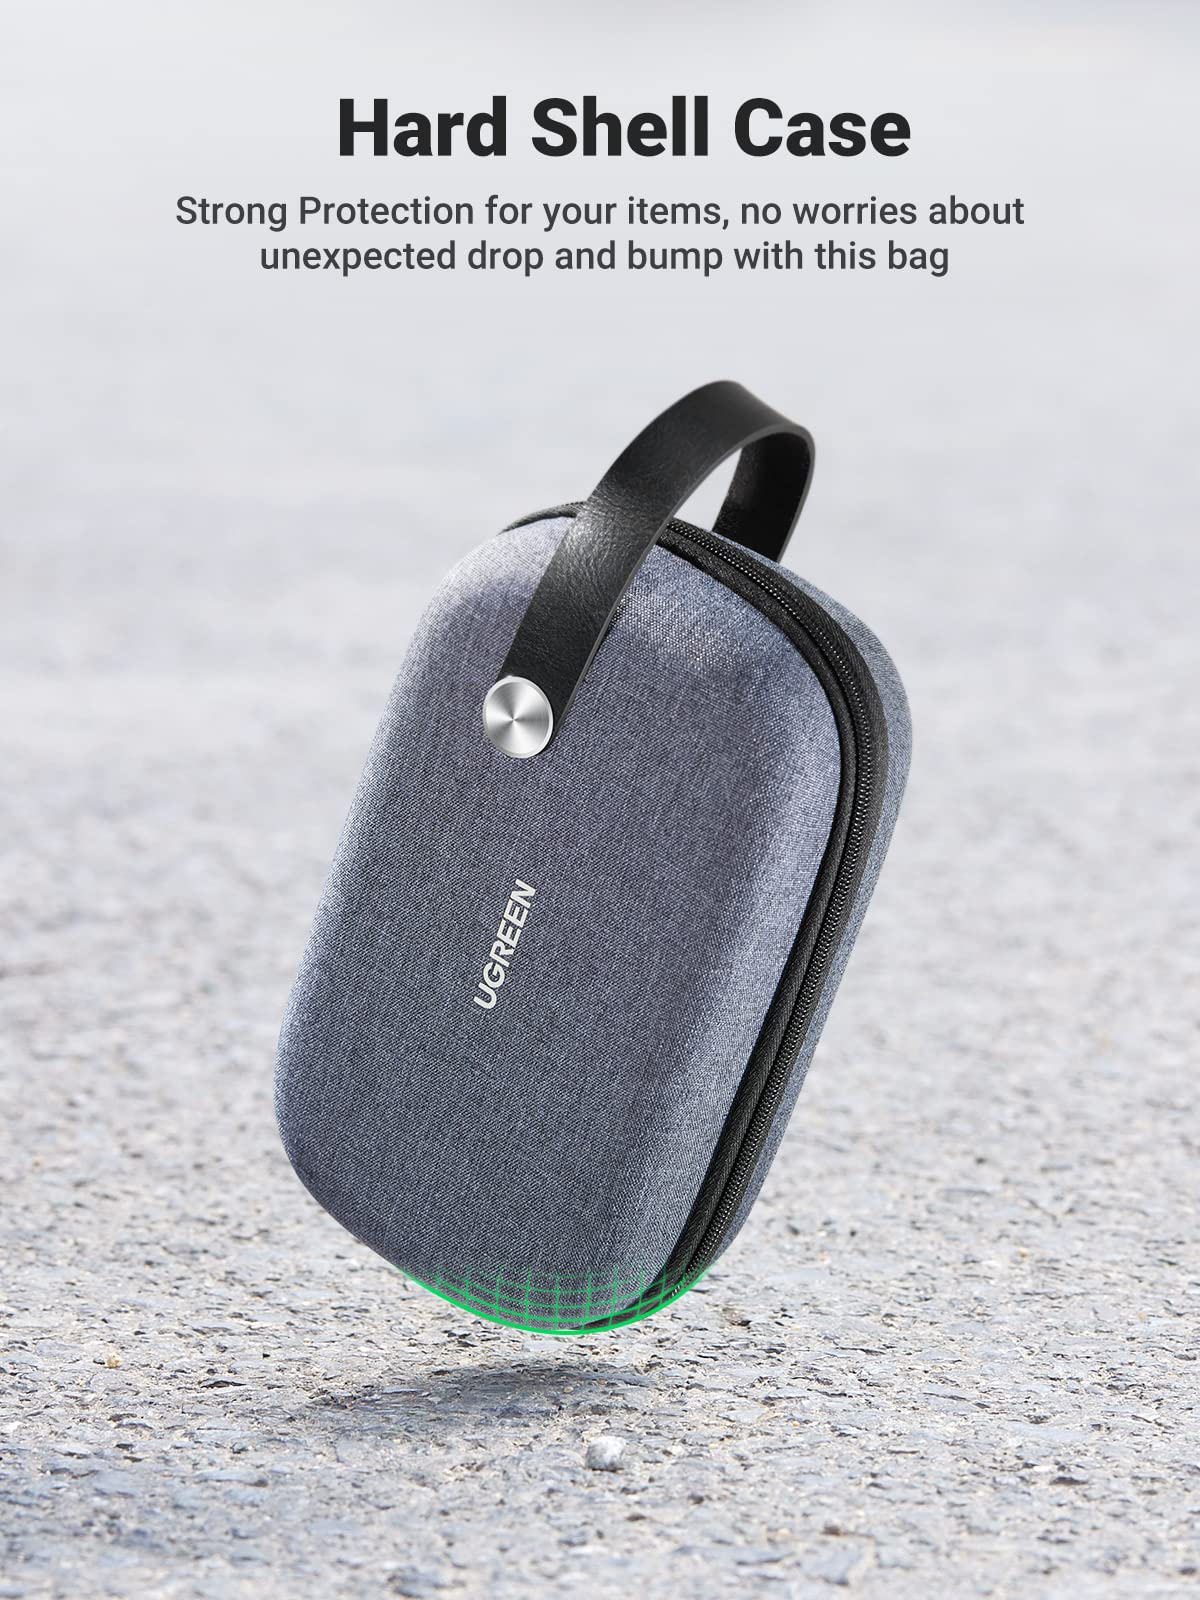 UGREEN Travel Accessories, Portable Cable Organiser Bag Travel Electronics Organiser Small Gadget Cable Bag Cable Pouch, Hard Case for Cable Charger Adapter Power Bank Hard Drive SD Card